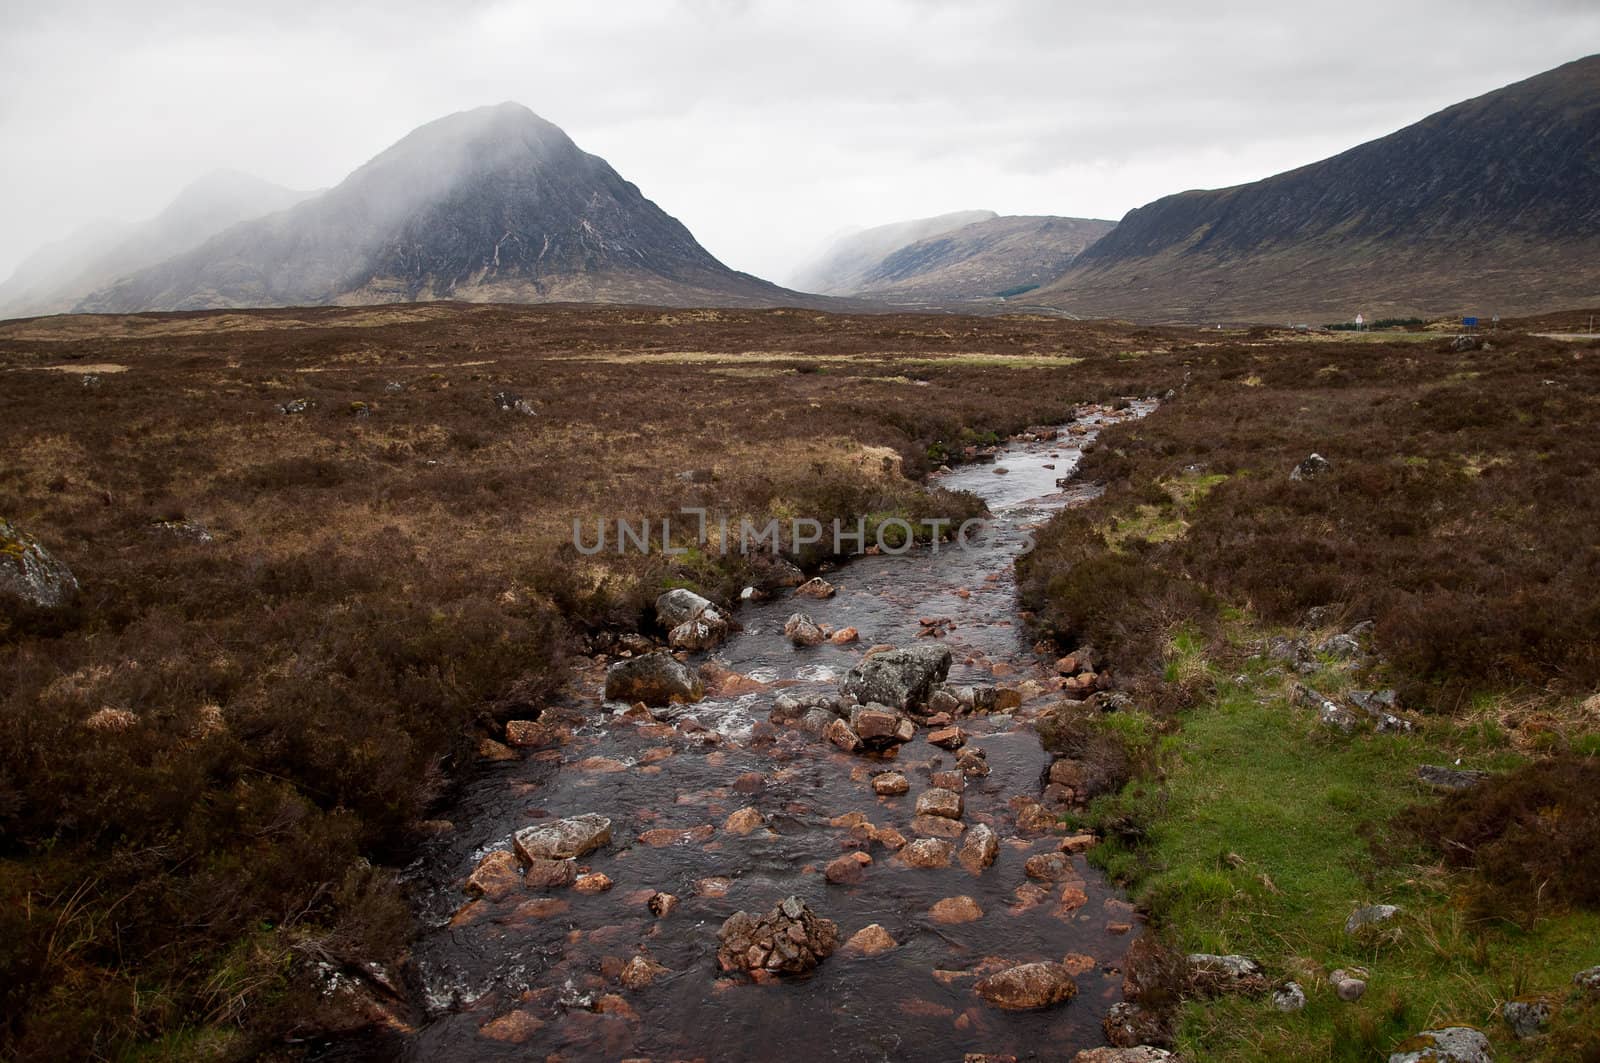 Buchaille Etive Mor is one of Scotland's most distinctive mountains.